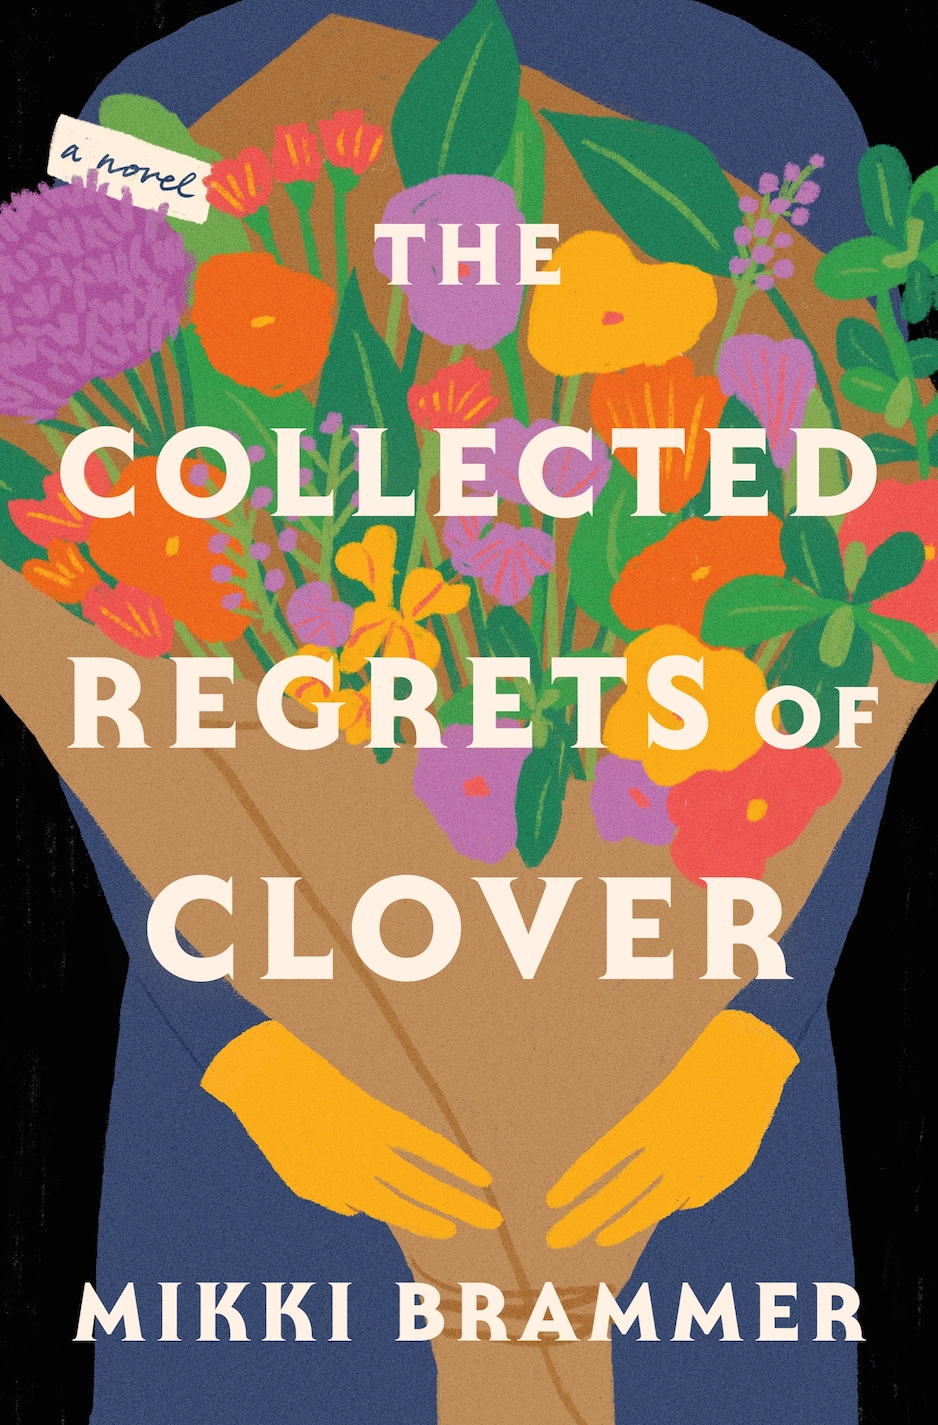 Book Launch: The Collected Regrets of Clover by Mikki Brammer in conversation with Tory Henwood Hoen